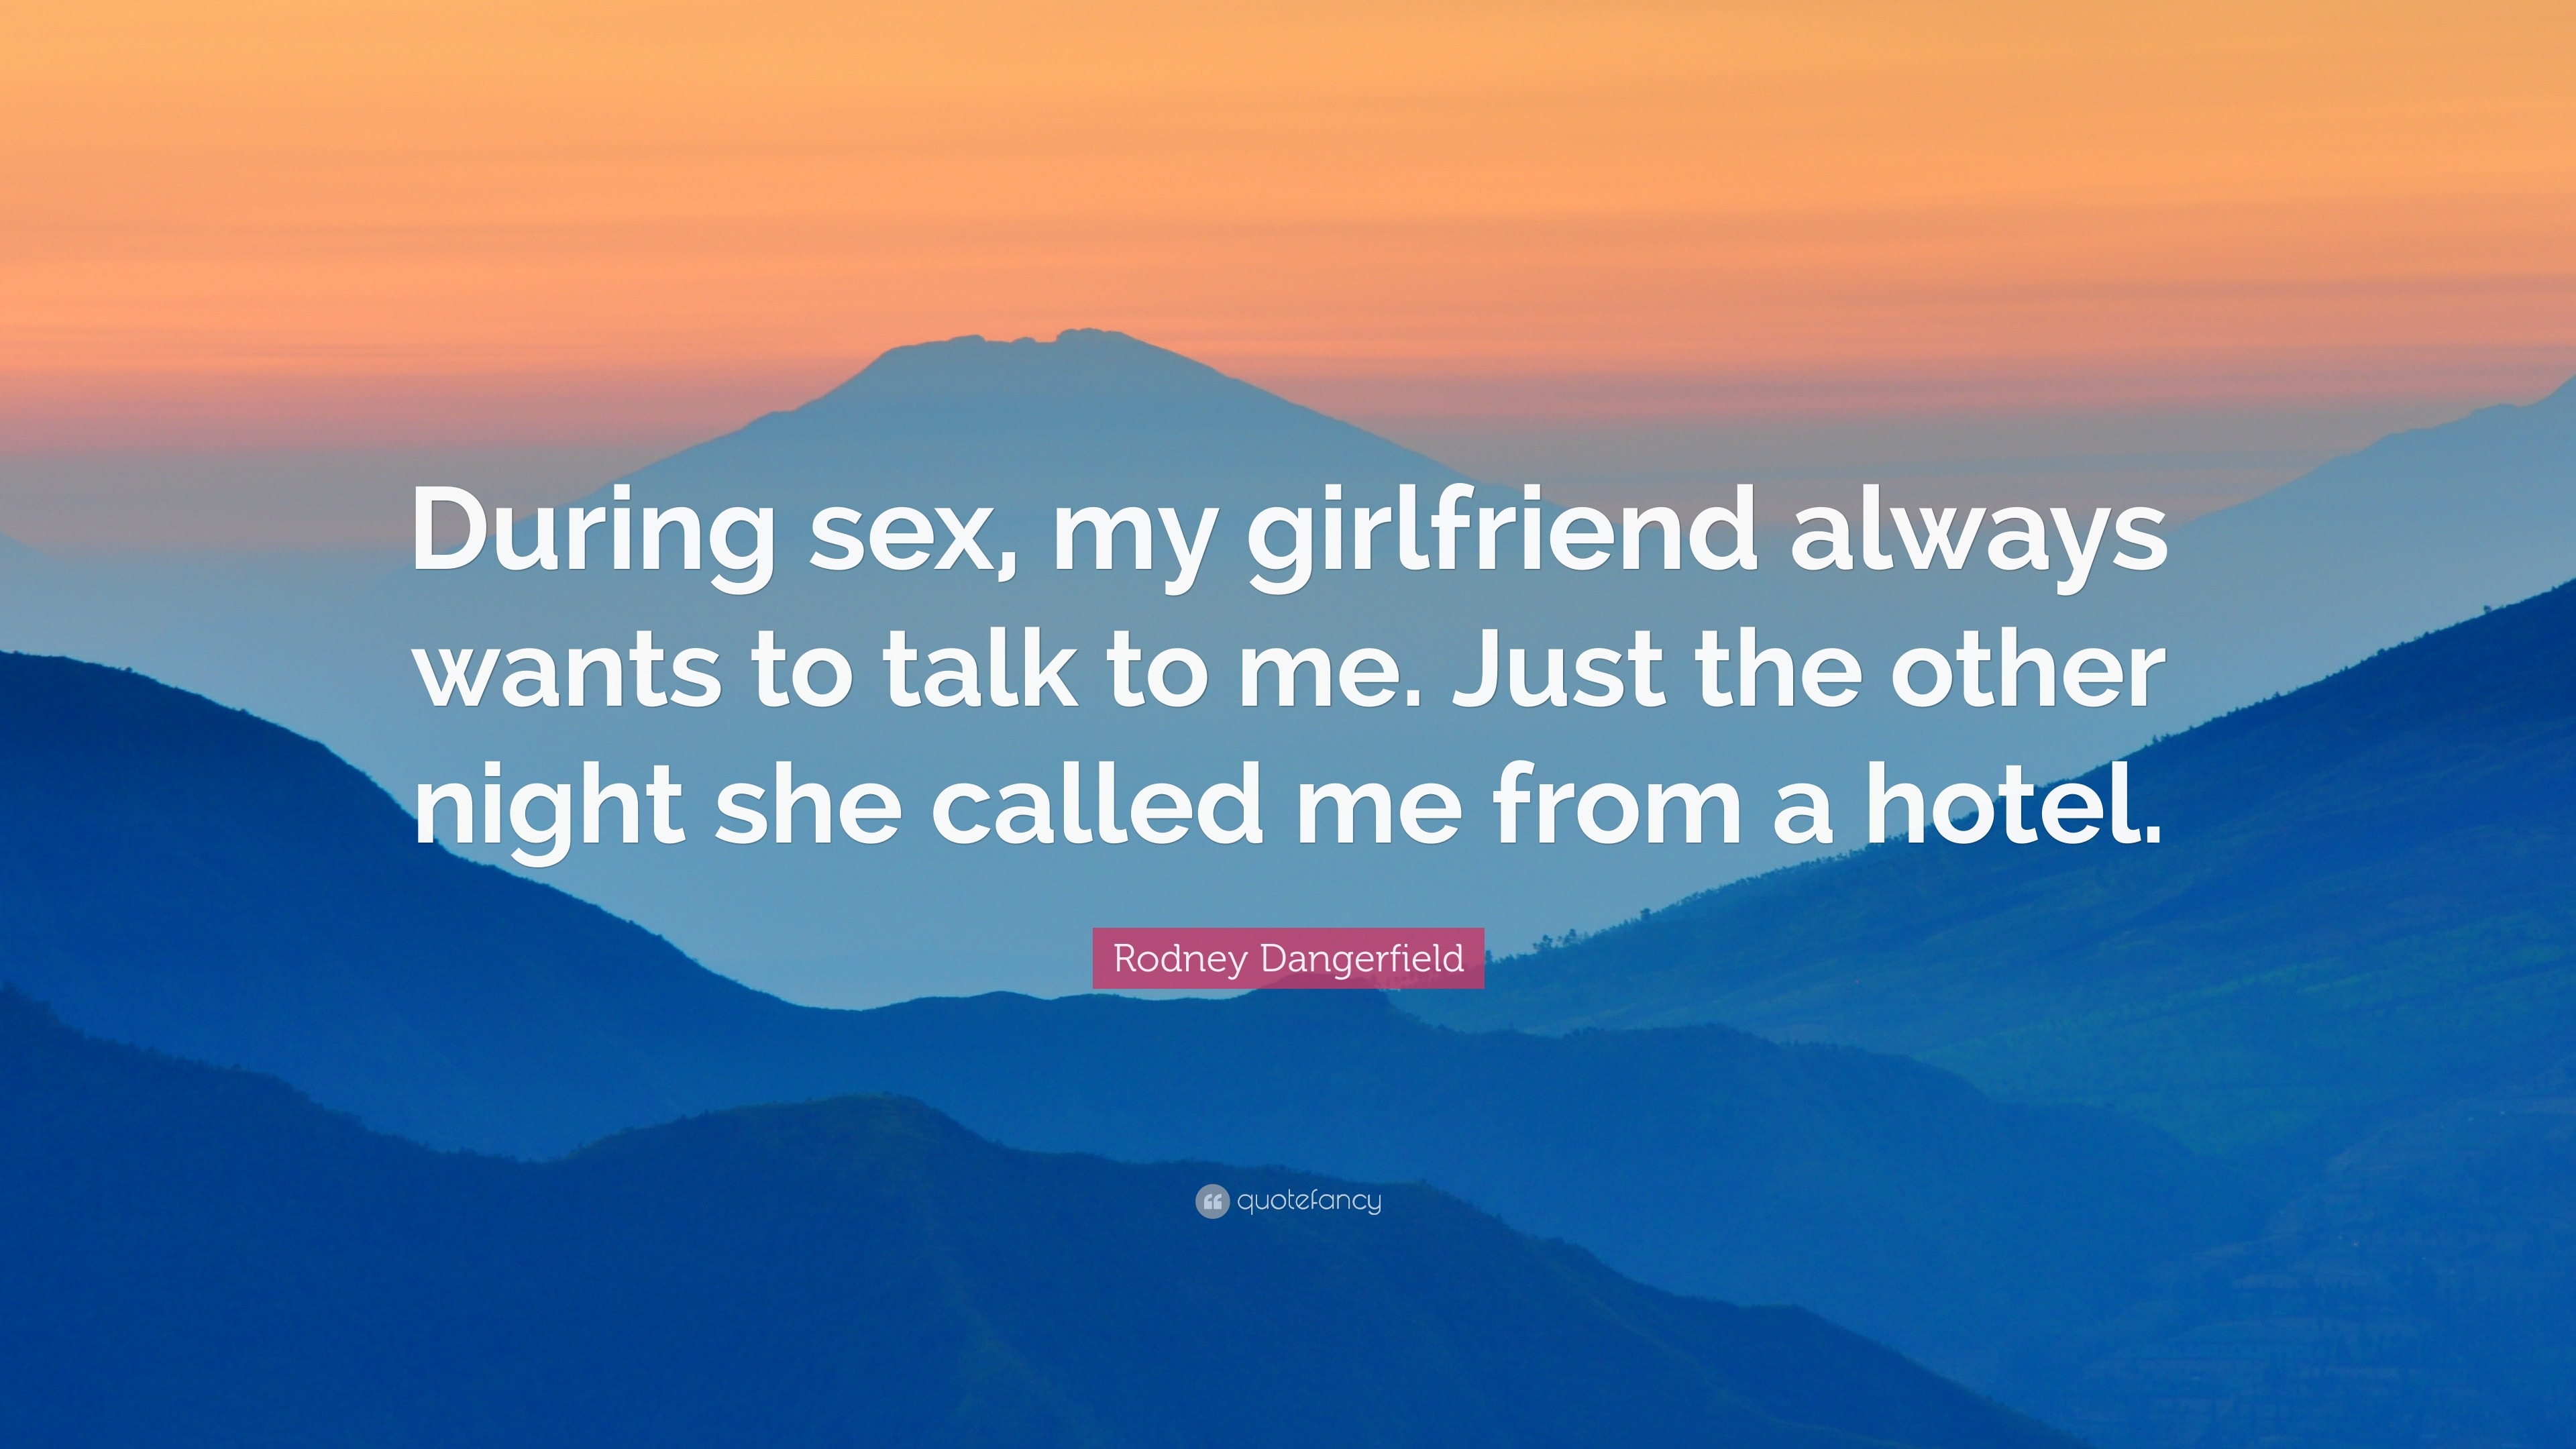 Rodney Dangerfield Quote “During sex, my girlfriend always wants to talk to me